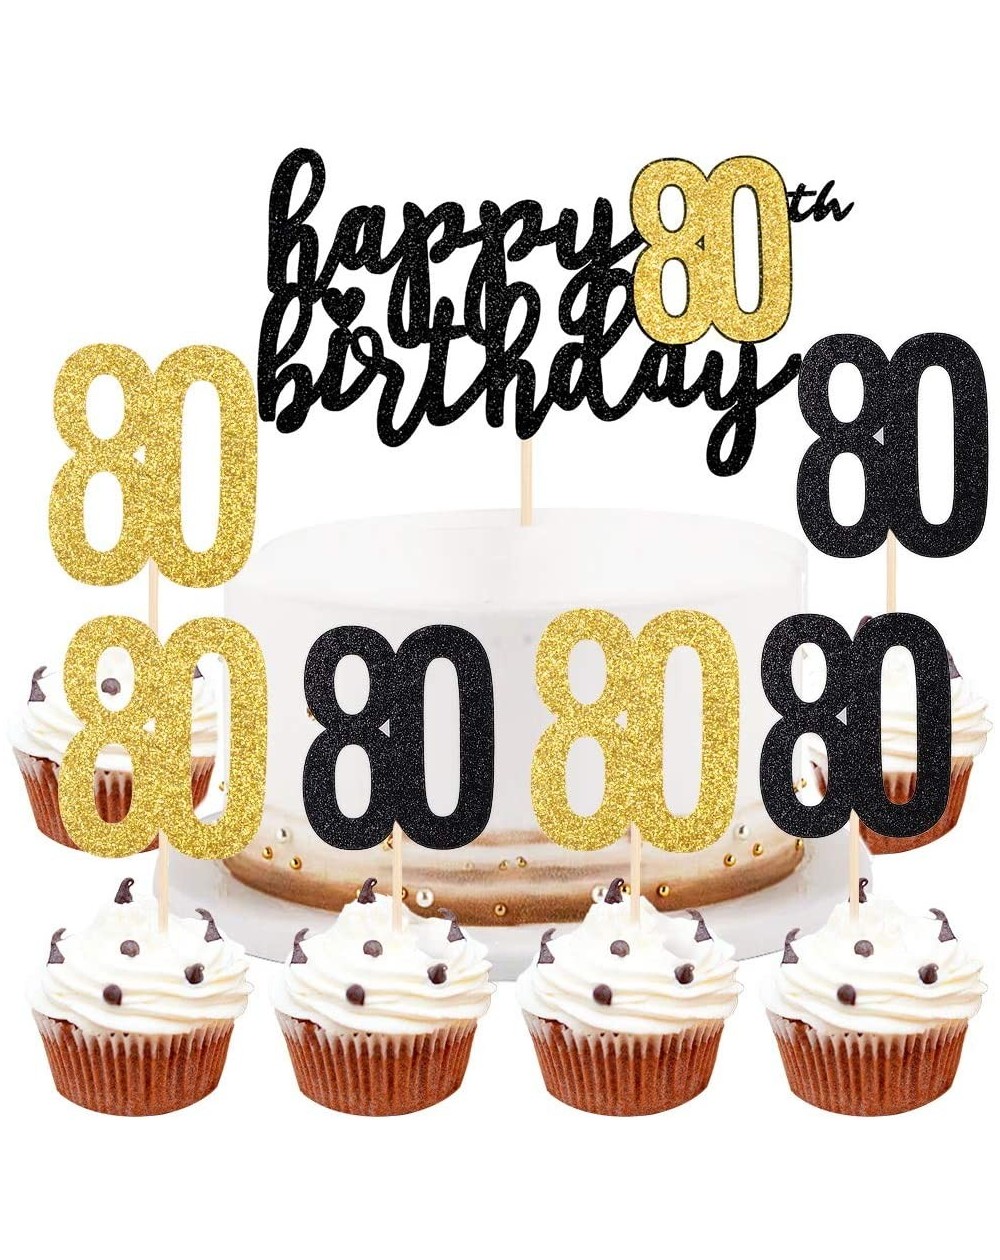 Cake & Cupcake Toppers Happy Birthday Cake Topper Black Font Golden Numbers 80th Birthday Happy Cake Topper digital 80 Paper ...